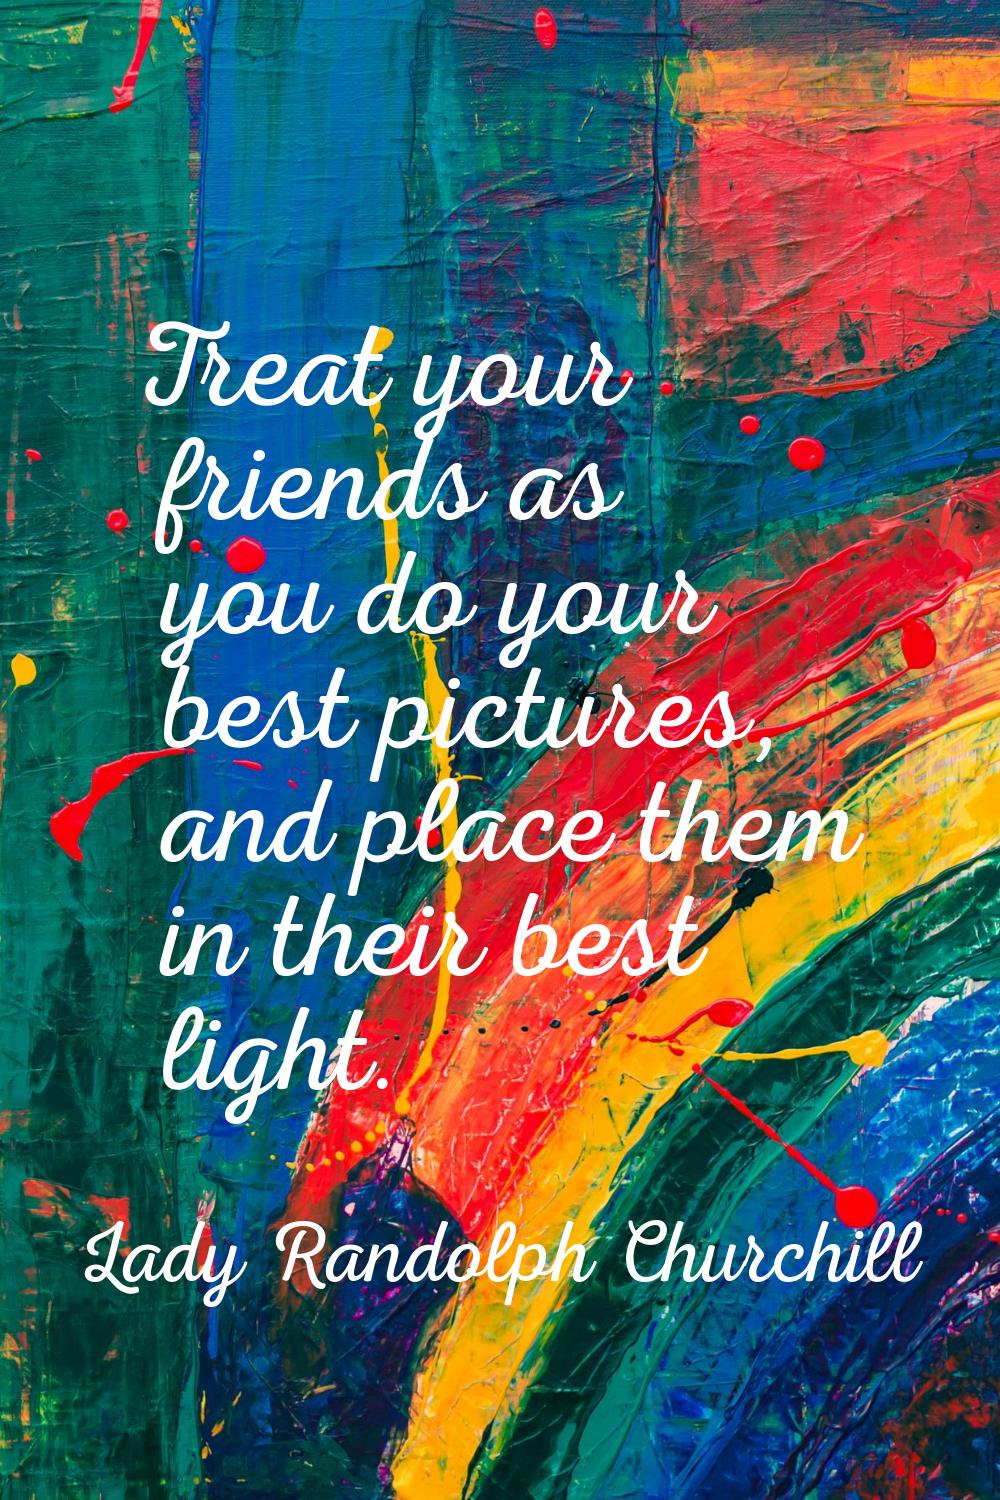 Treat your friends as you do your best pictures, and place them in their best light.